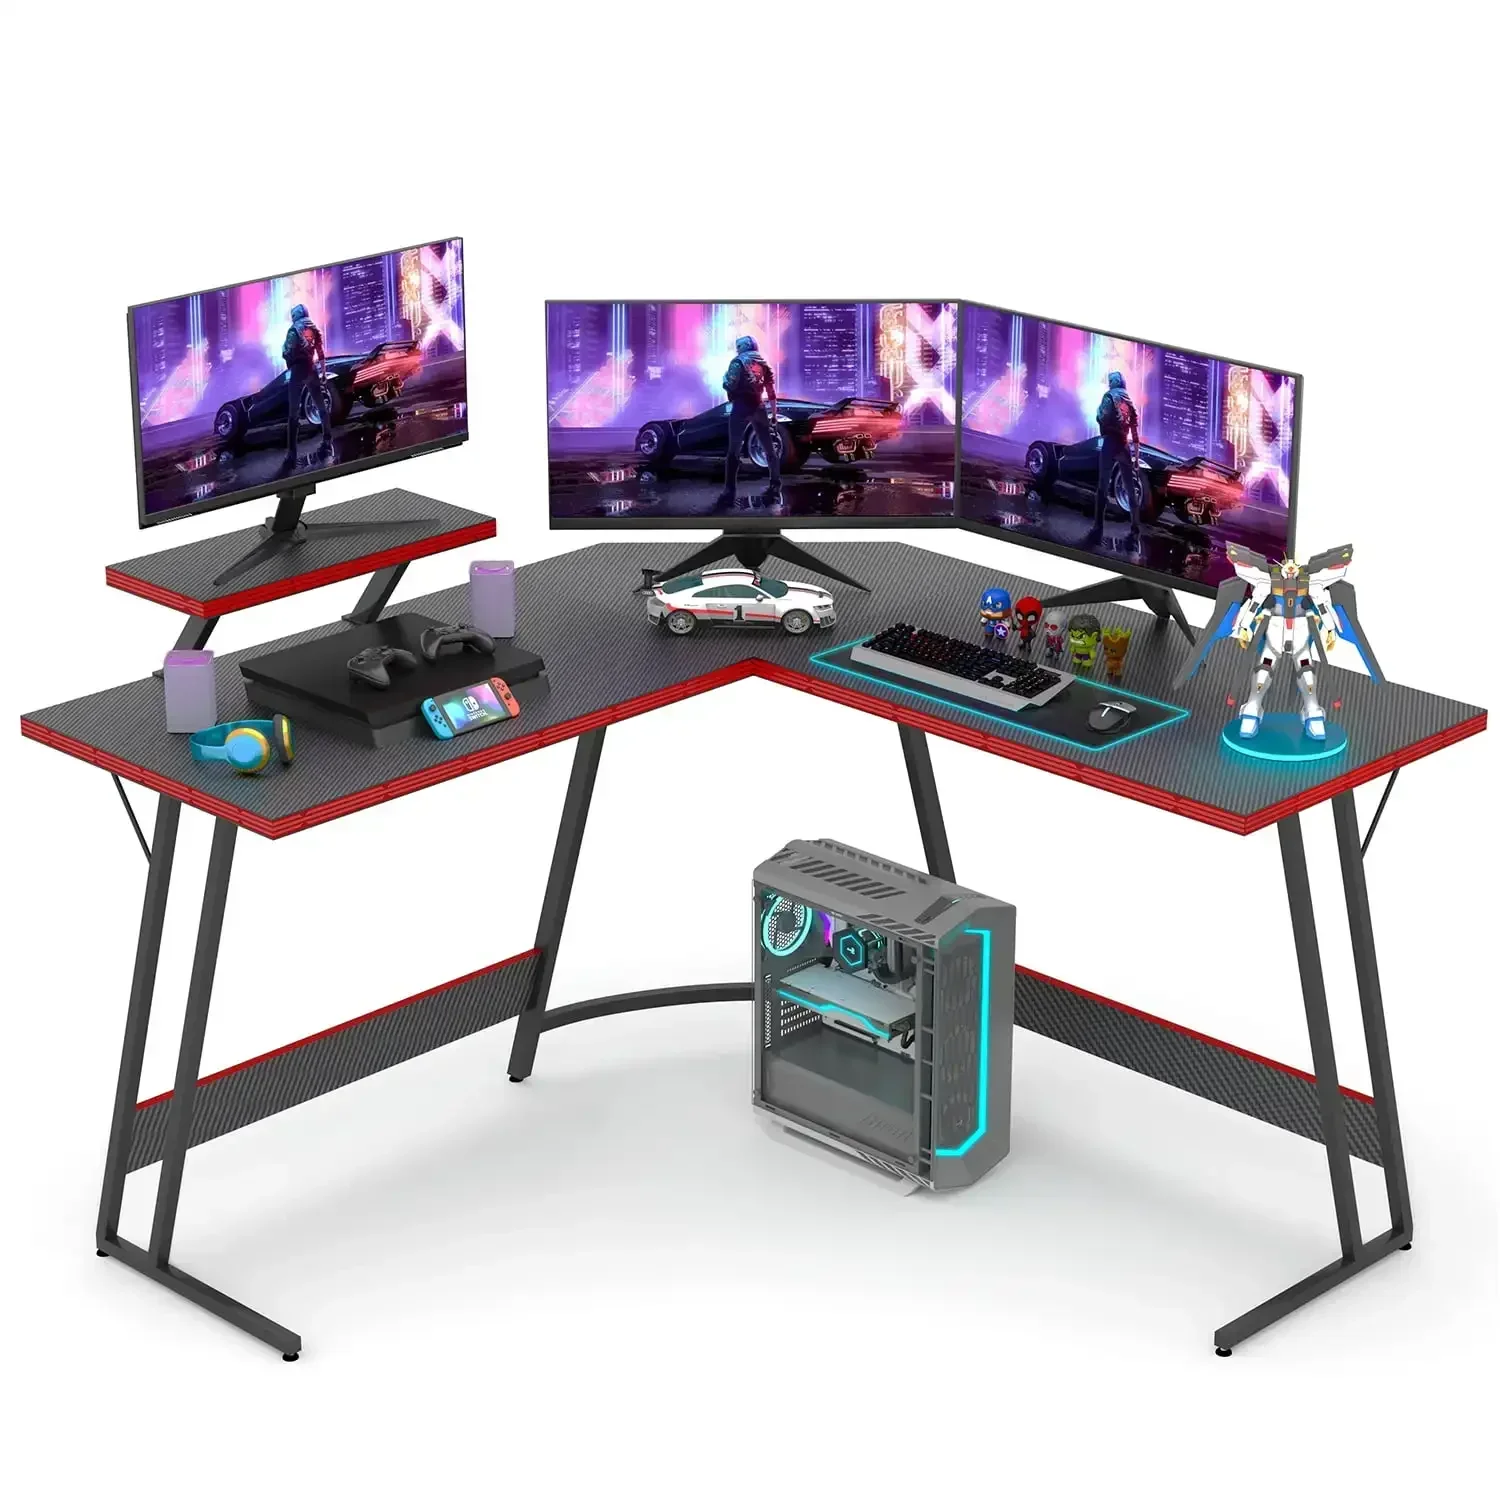 

51 Inch L-Shaped Gaming Computer Corner Desk PC Gaming Desk Table with Large Monitor Riser Stand,Black/Blue/Pink